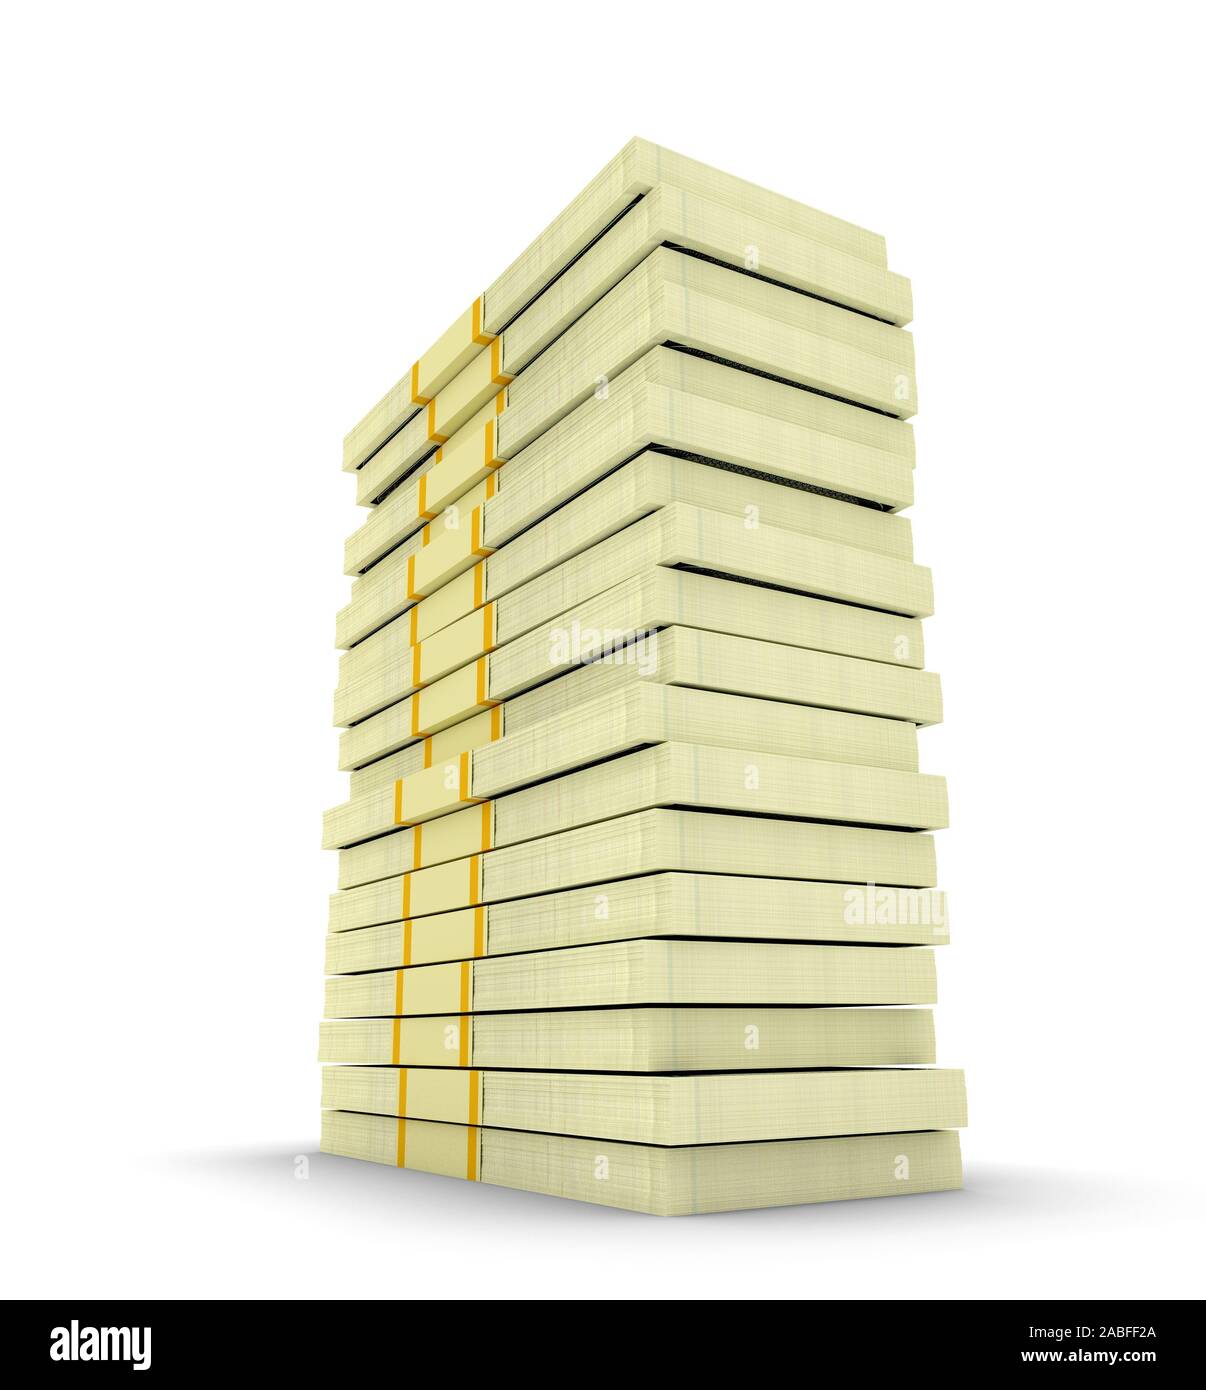 Illustration of big money stack from dollars usa isolated on white. Finance concepts. 3d render Stock Photo